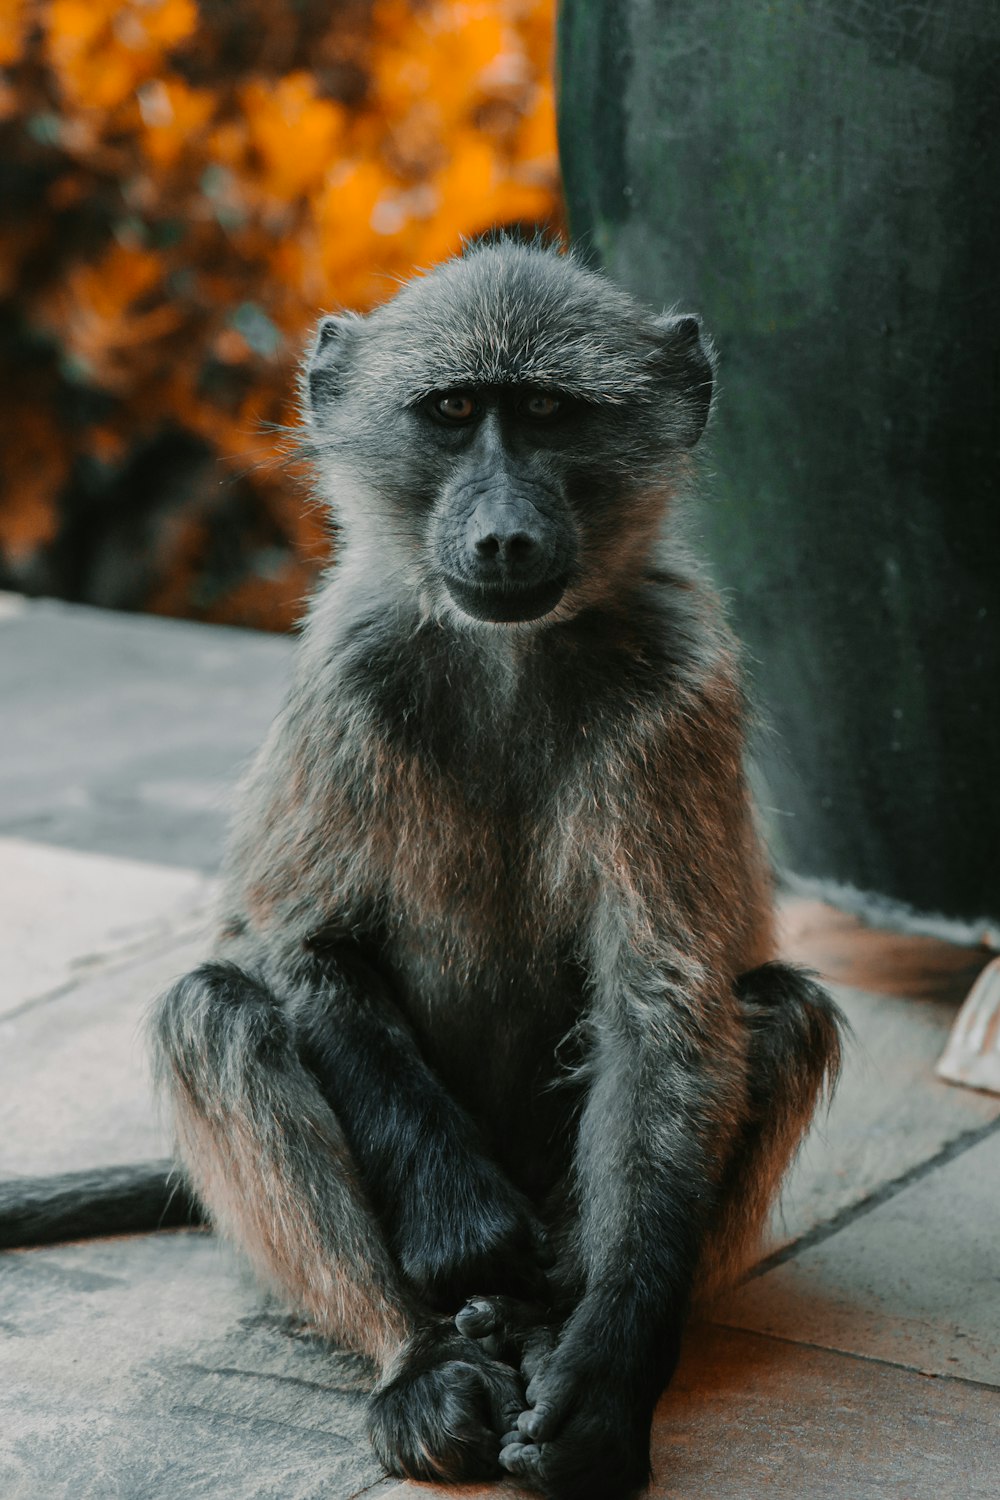 brown and gray monkey sitting on gray concrete wall during daytime